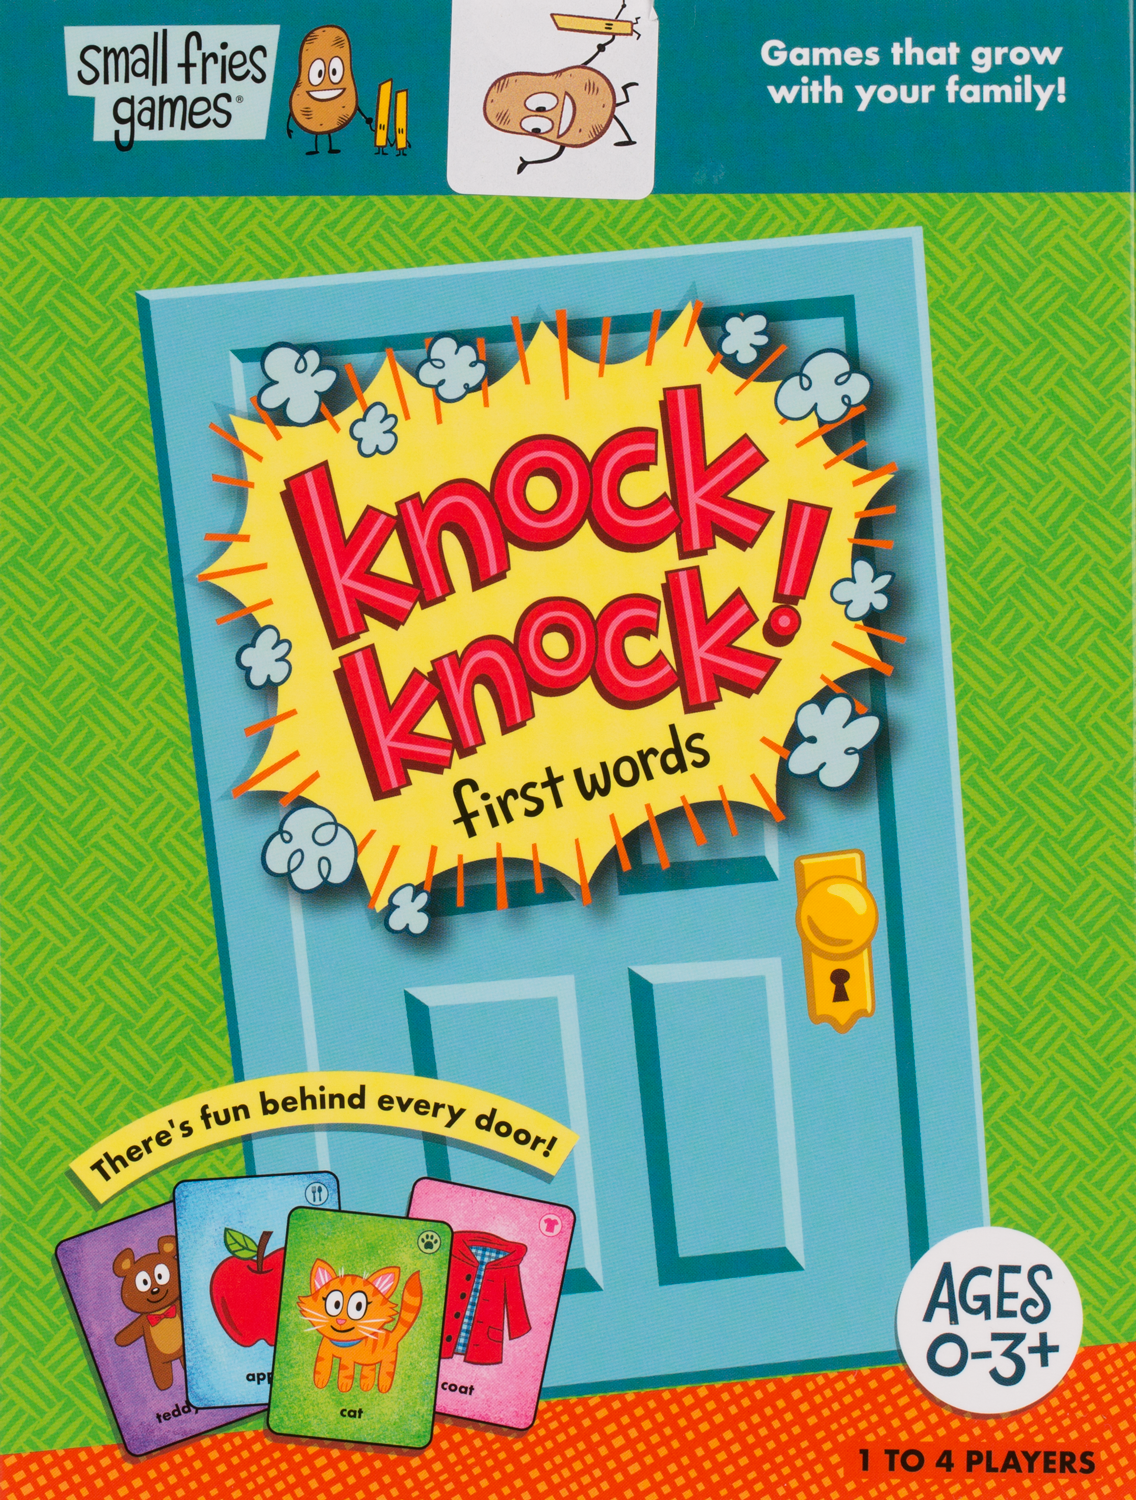 Knock-Knock!-First-Words-01-buy-games-for-babies-and-Toddlers-at-Out-Of-Town-Games